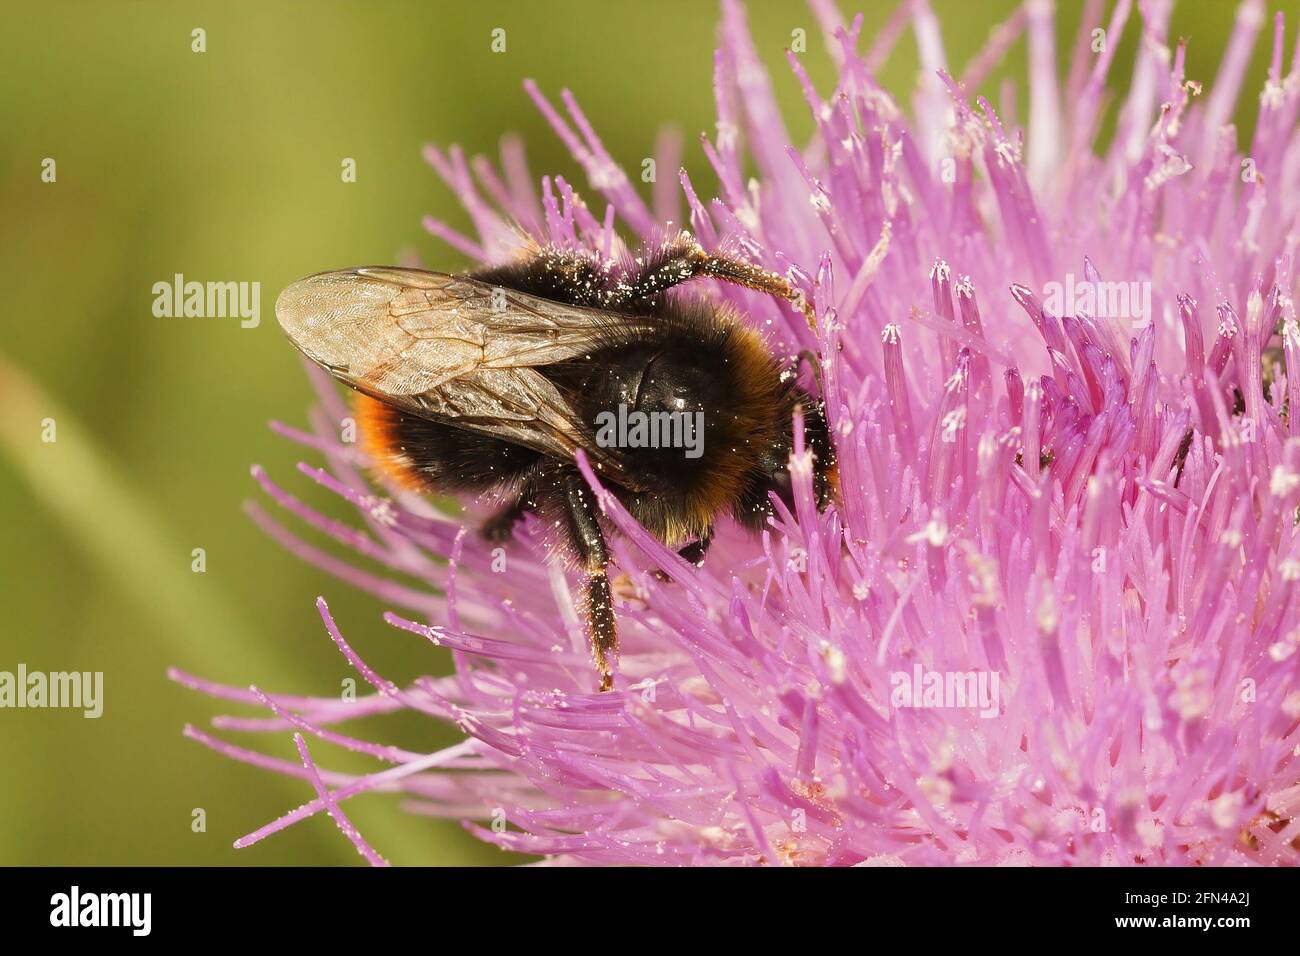 Closeup of a Bombus campestris cuckoo bumblebee on a flower Stock Photo